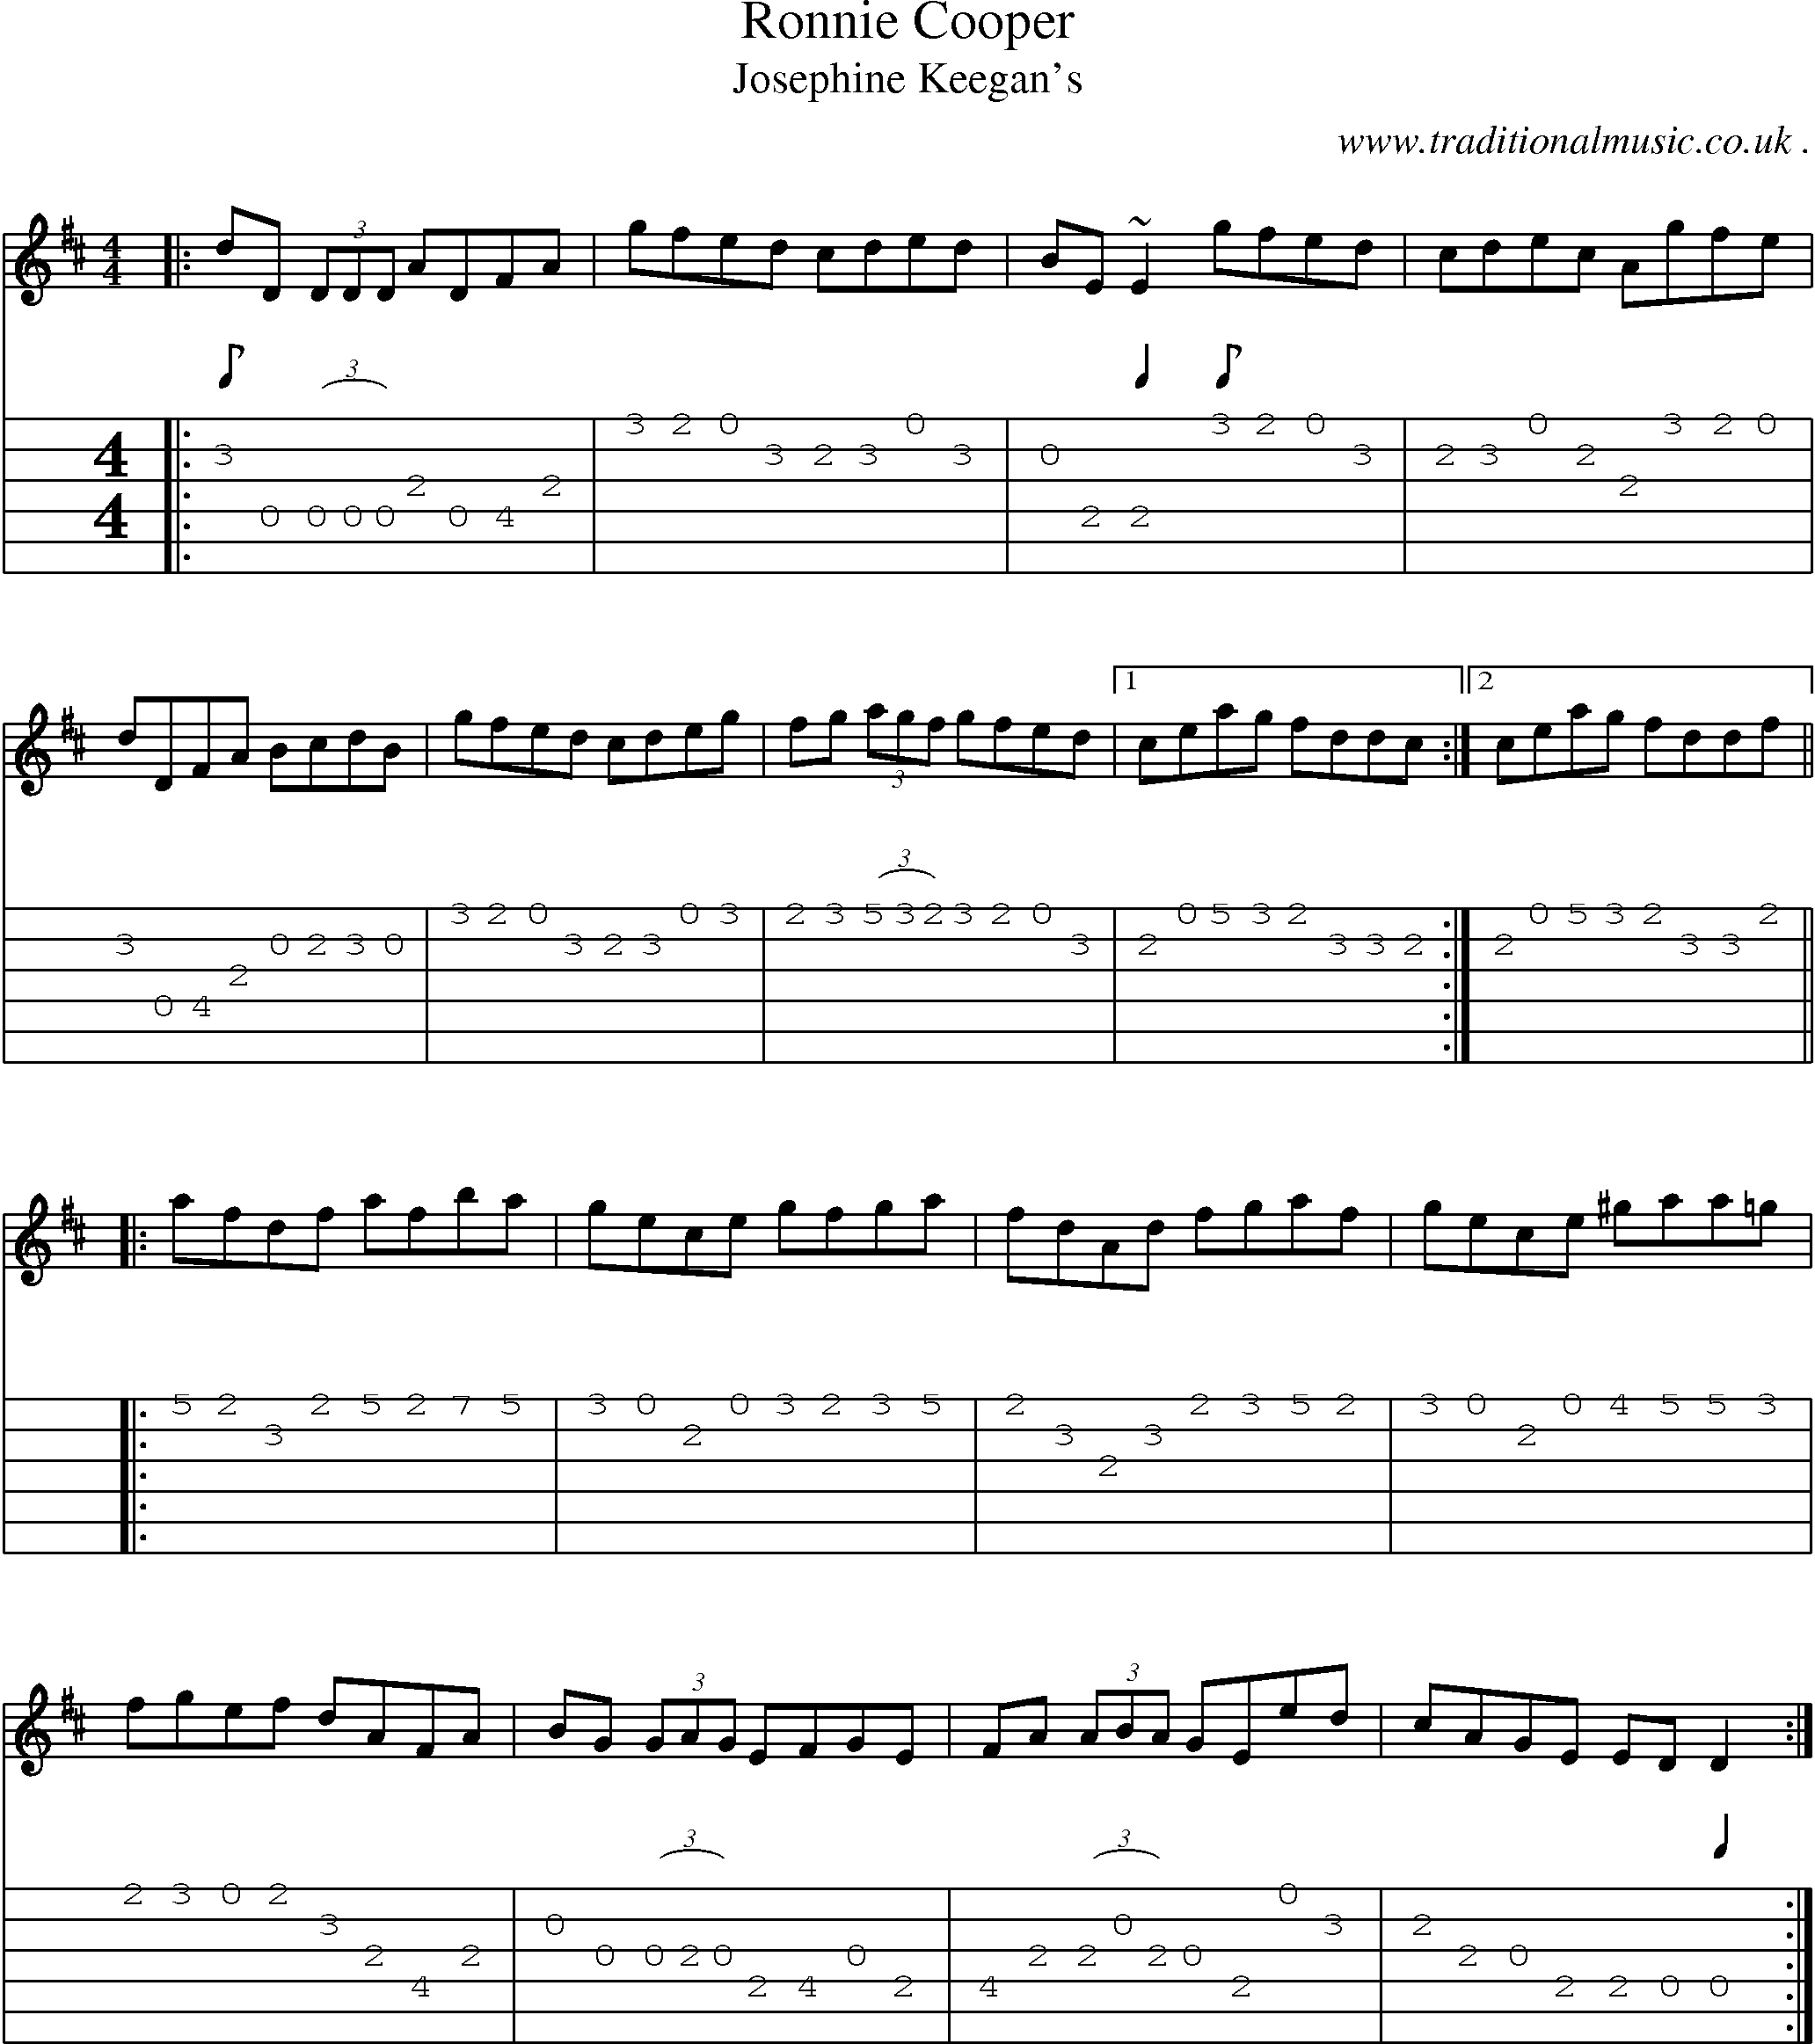 Sheet-music  score, Chords and Guitar Tabs for Ronnie Cooper